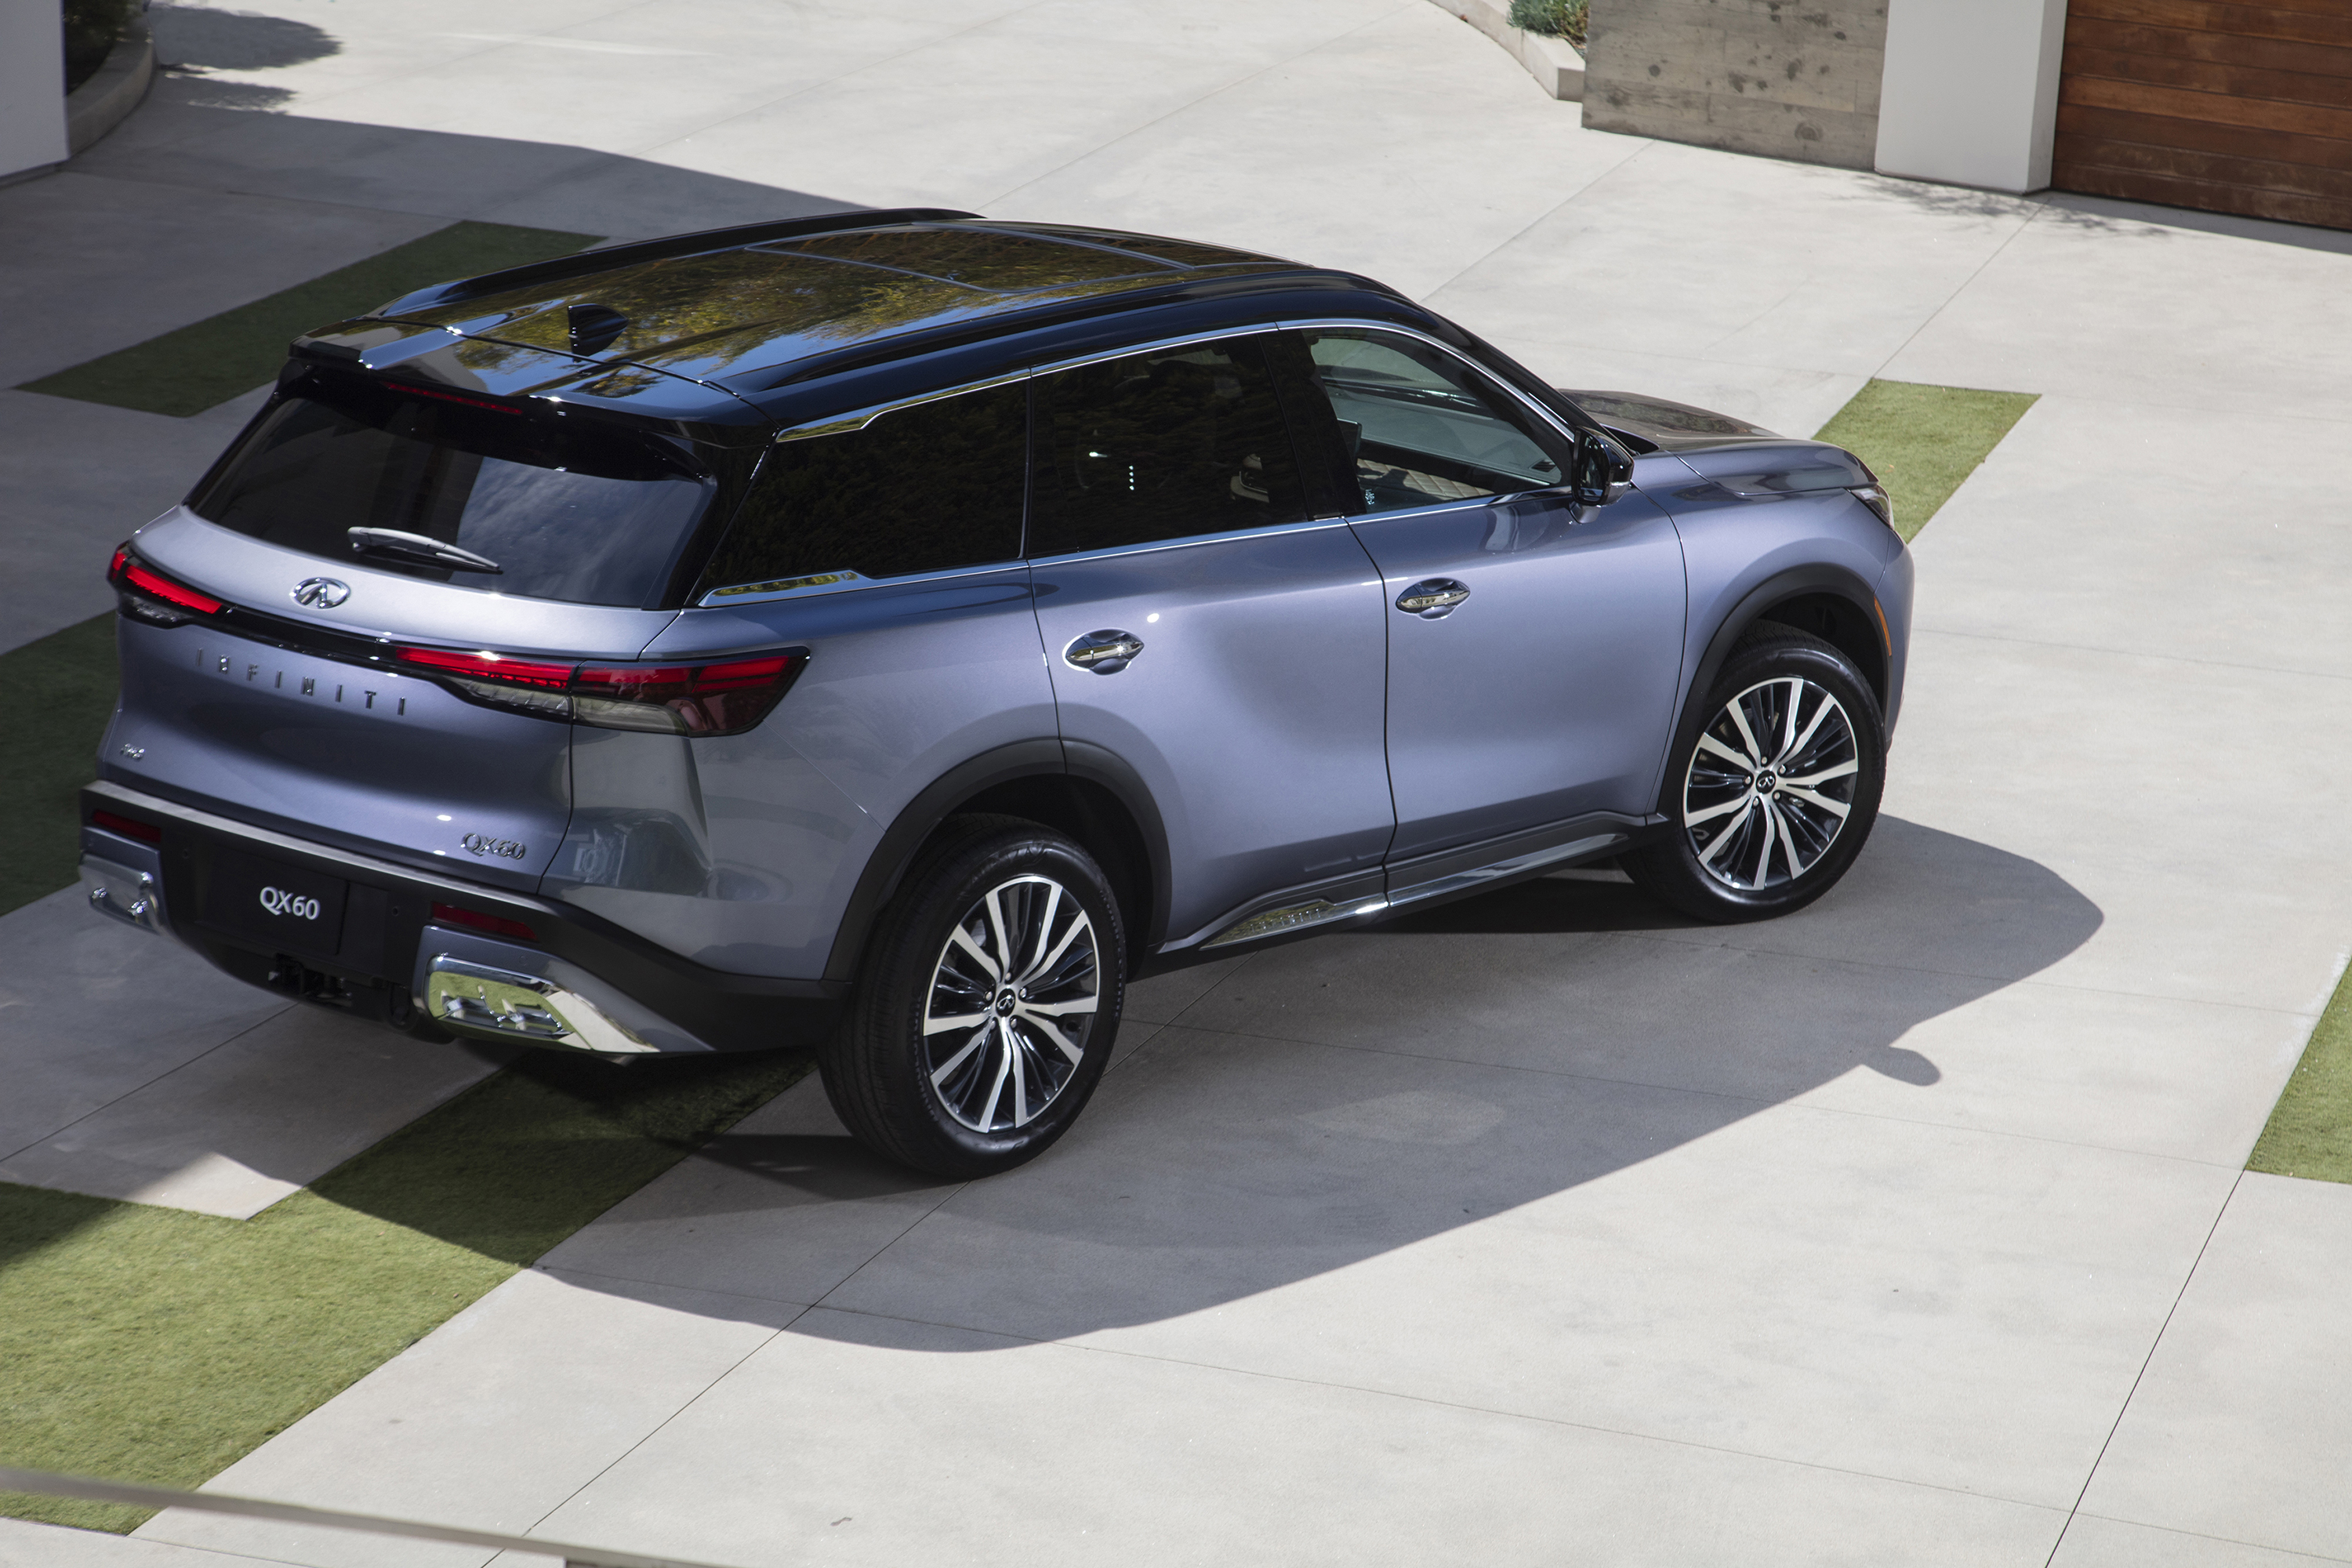 New 2022 Infiniti QX60 is a Thoroughly Redesigned and Modern Mid-sized  Machine